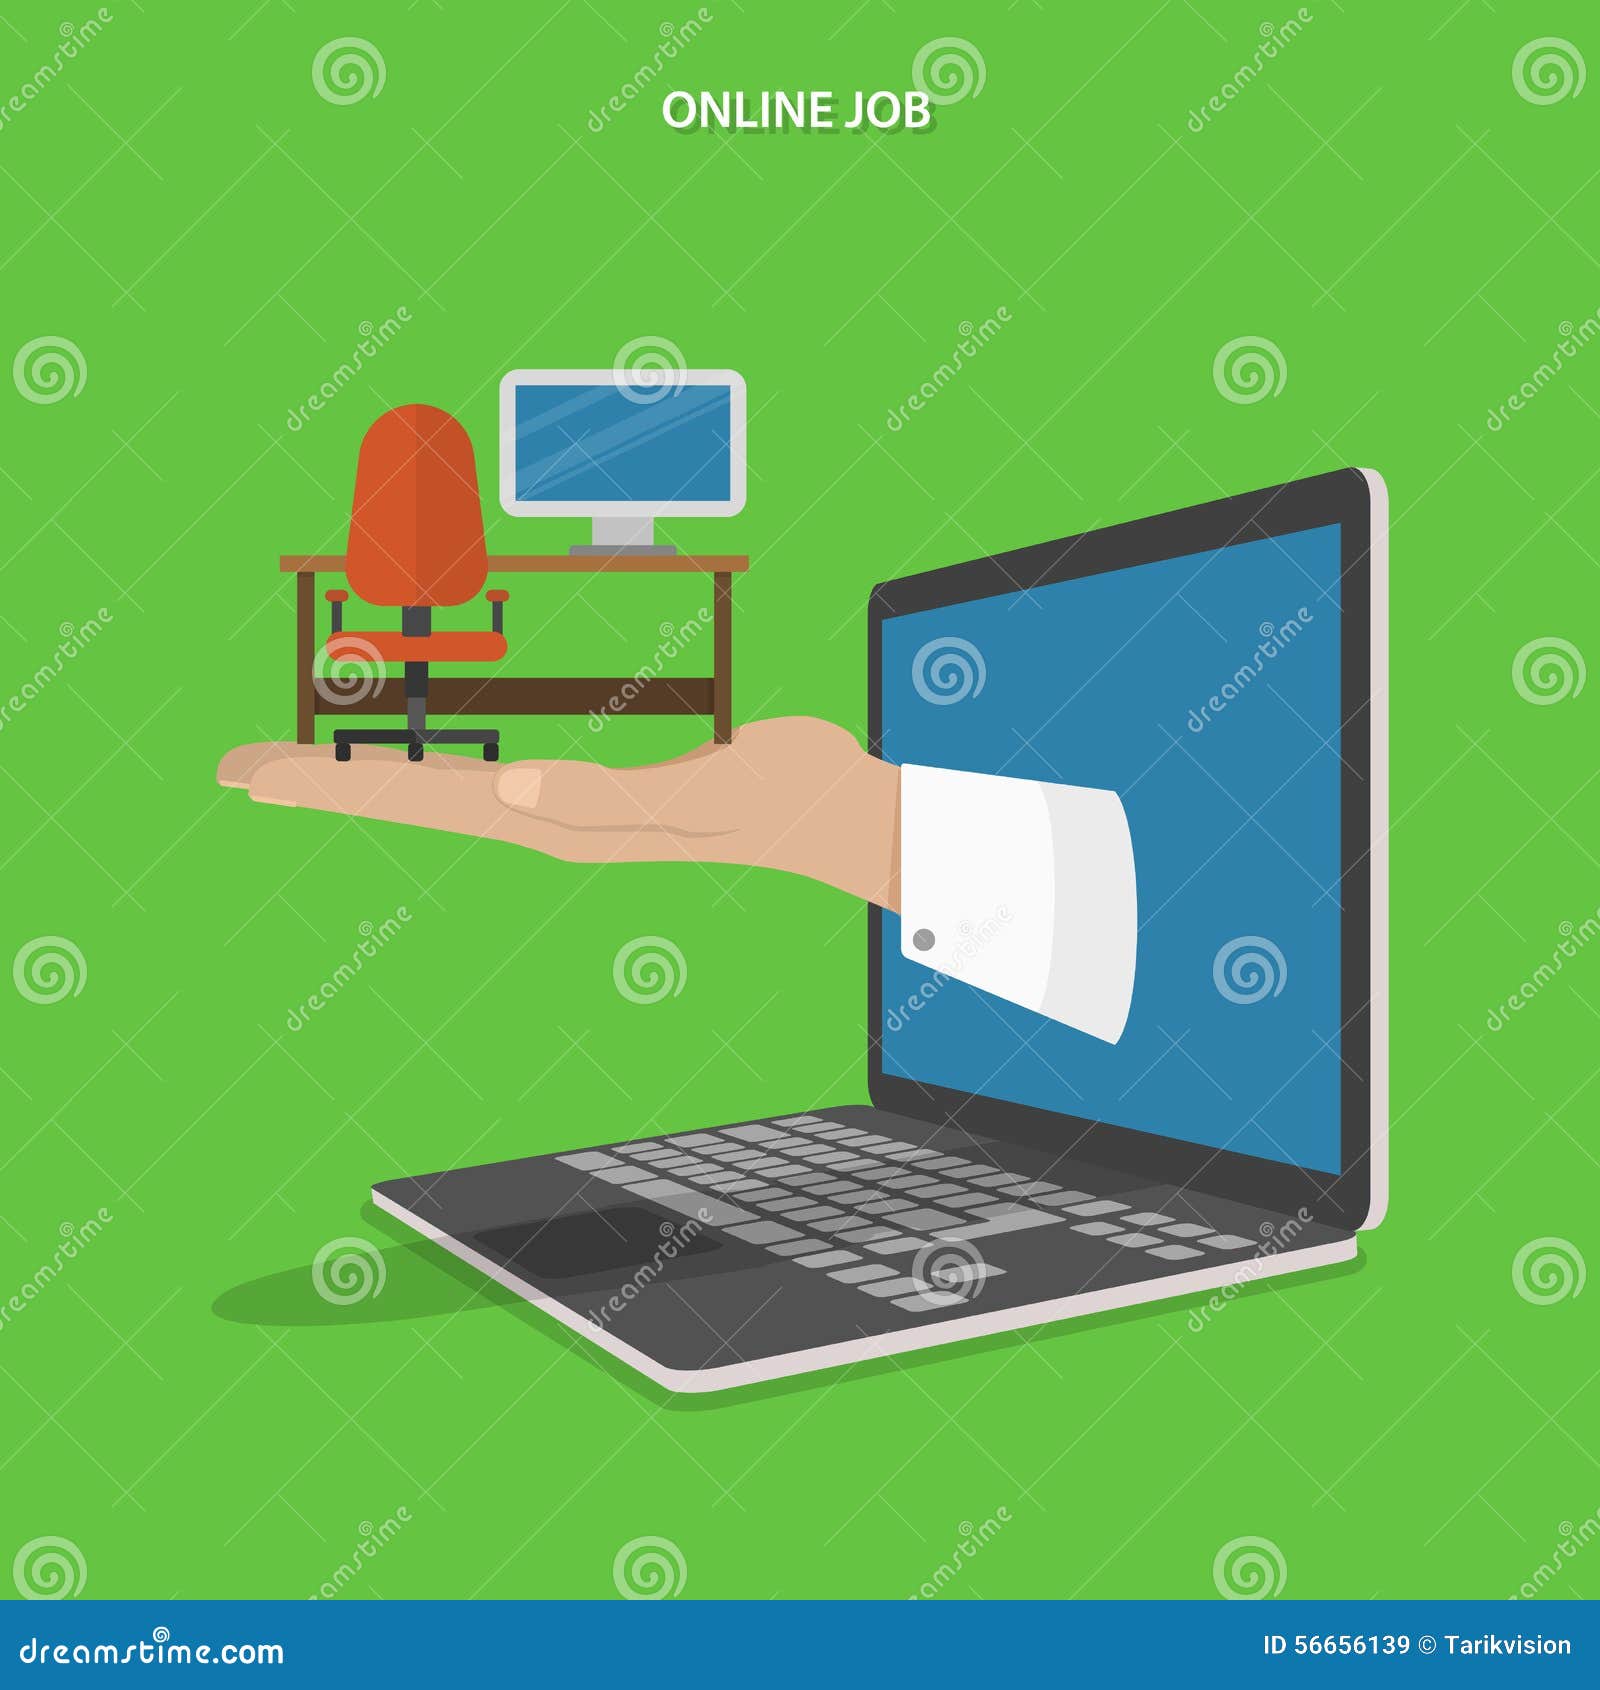 Online job searching flat vector concept.